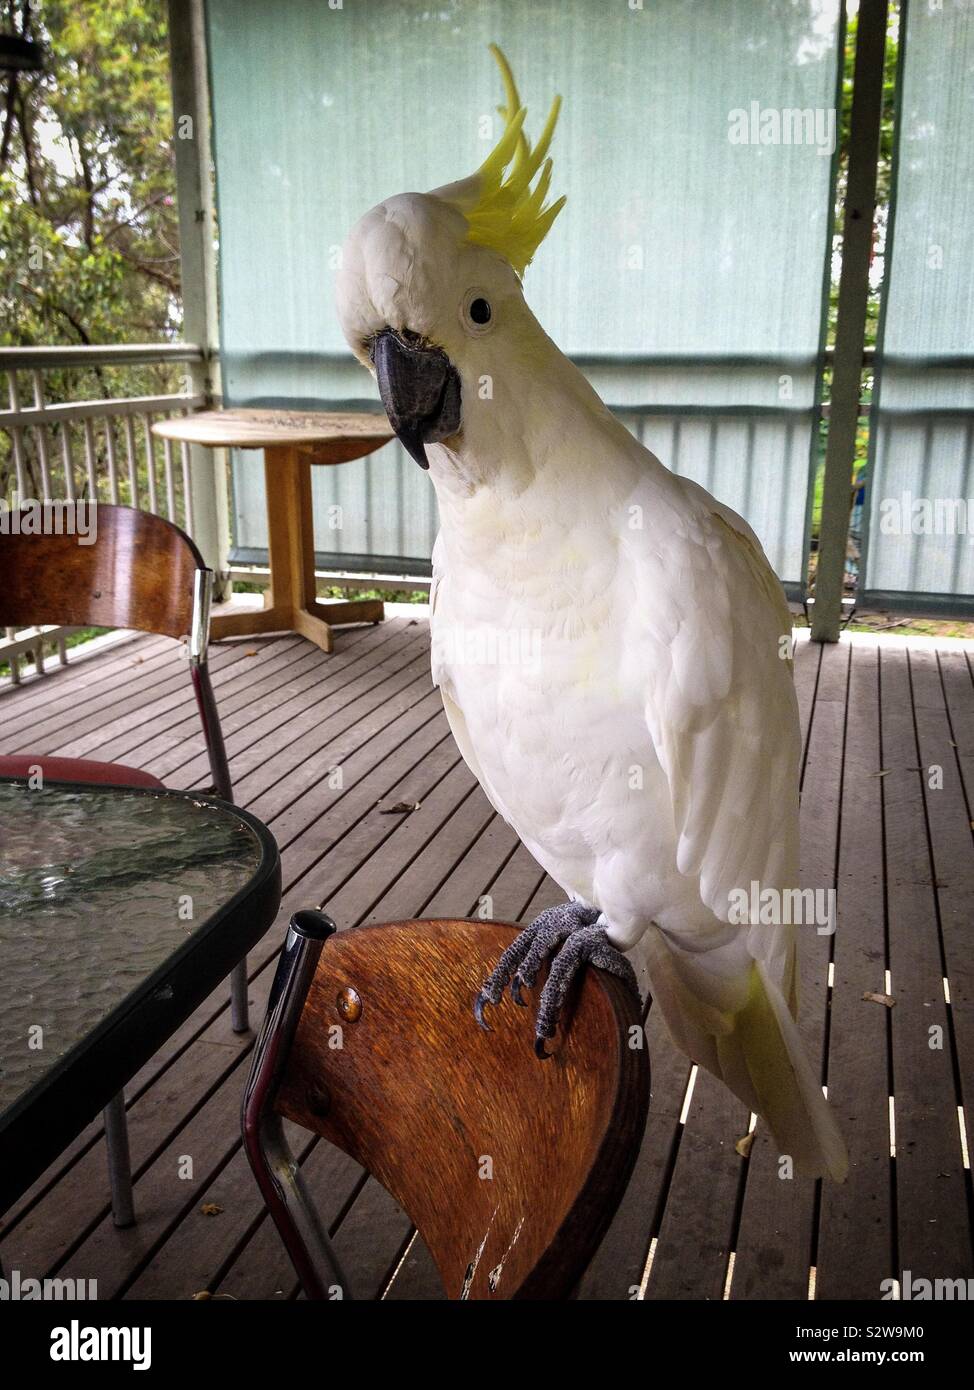 A cheeky and tame native Australian yellow crested cockatoo bird saying g’day mate Stock Photo